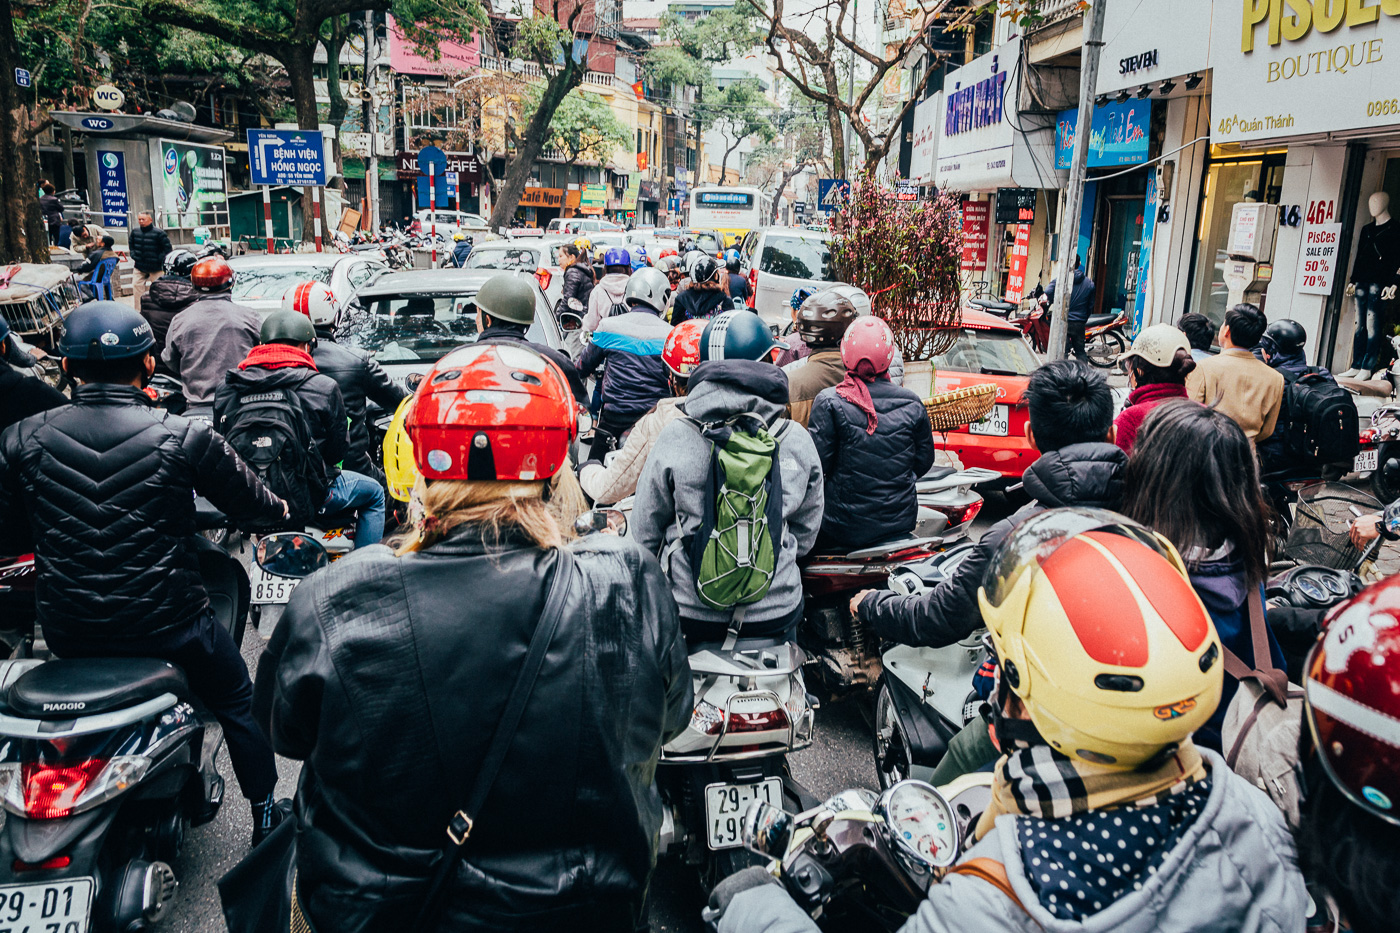 Lost in a sea of motorbikes on our Hanoi street food tour by motorbike